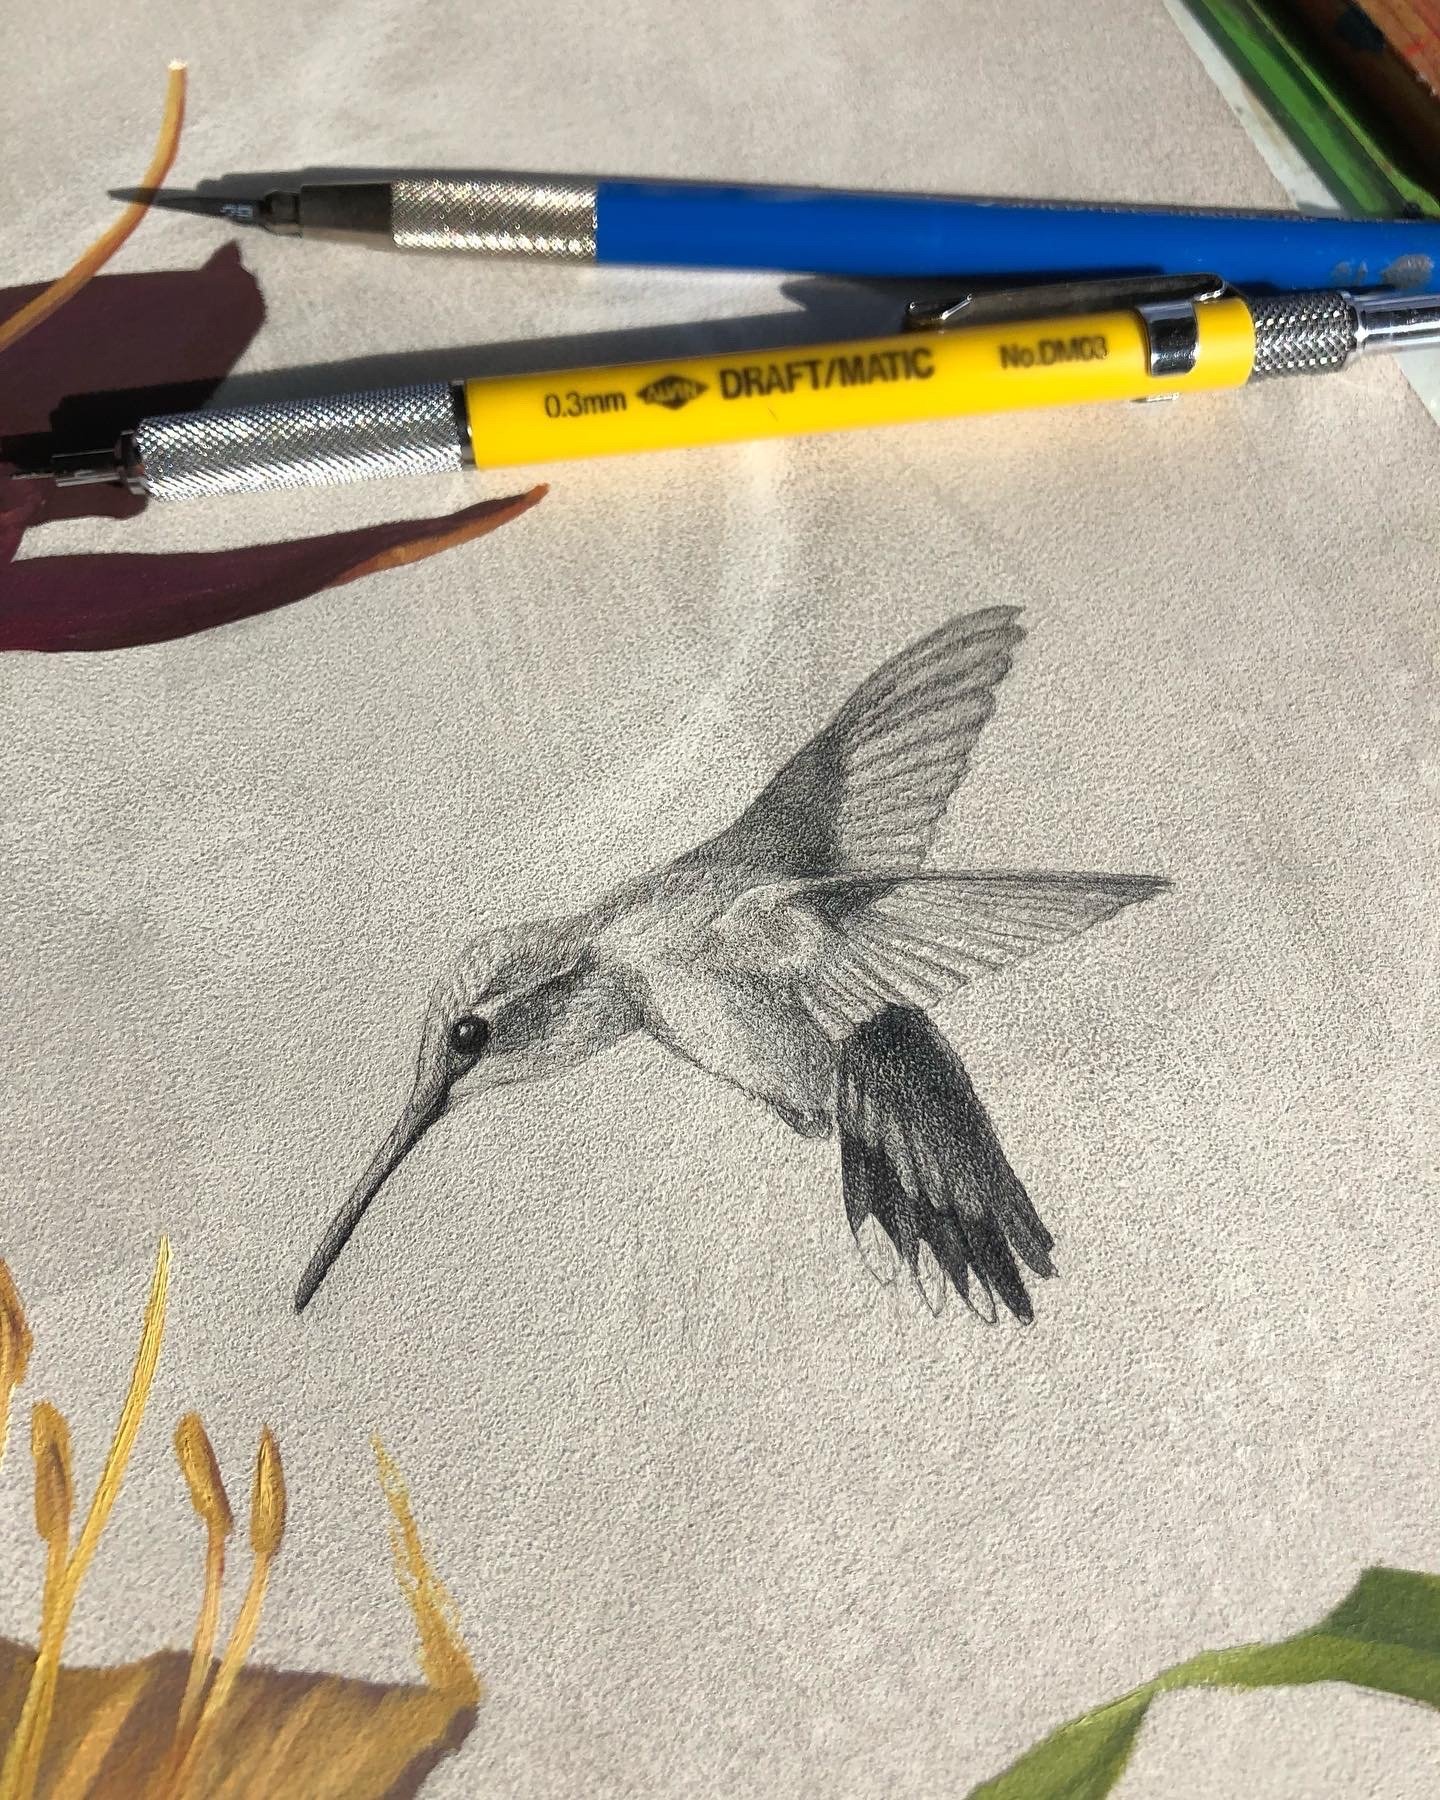 Drawing pollinators and other insects onto the panel is incredibly meditative.

While the graphite goes on smoothly, erasing is nearly impossible. It smears and because I use a very small HB lead (.3 mm), it embeds a bit into the ground. So I plan ou